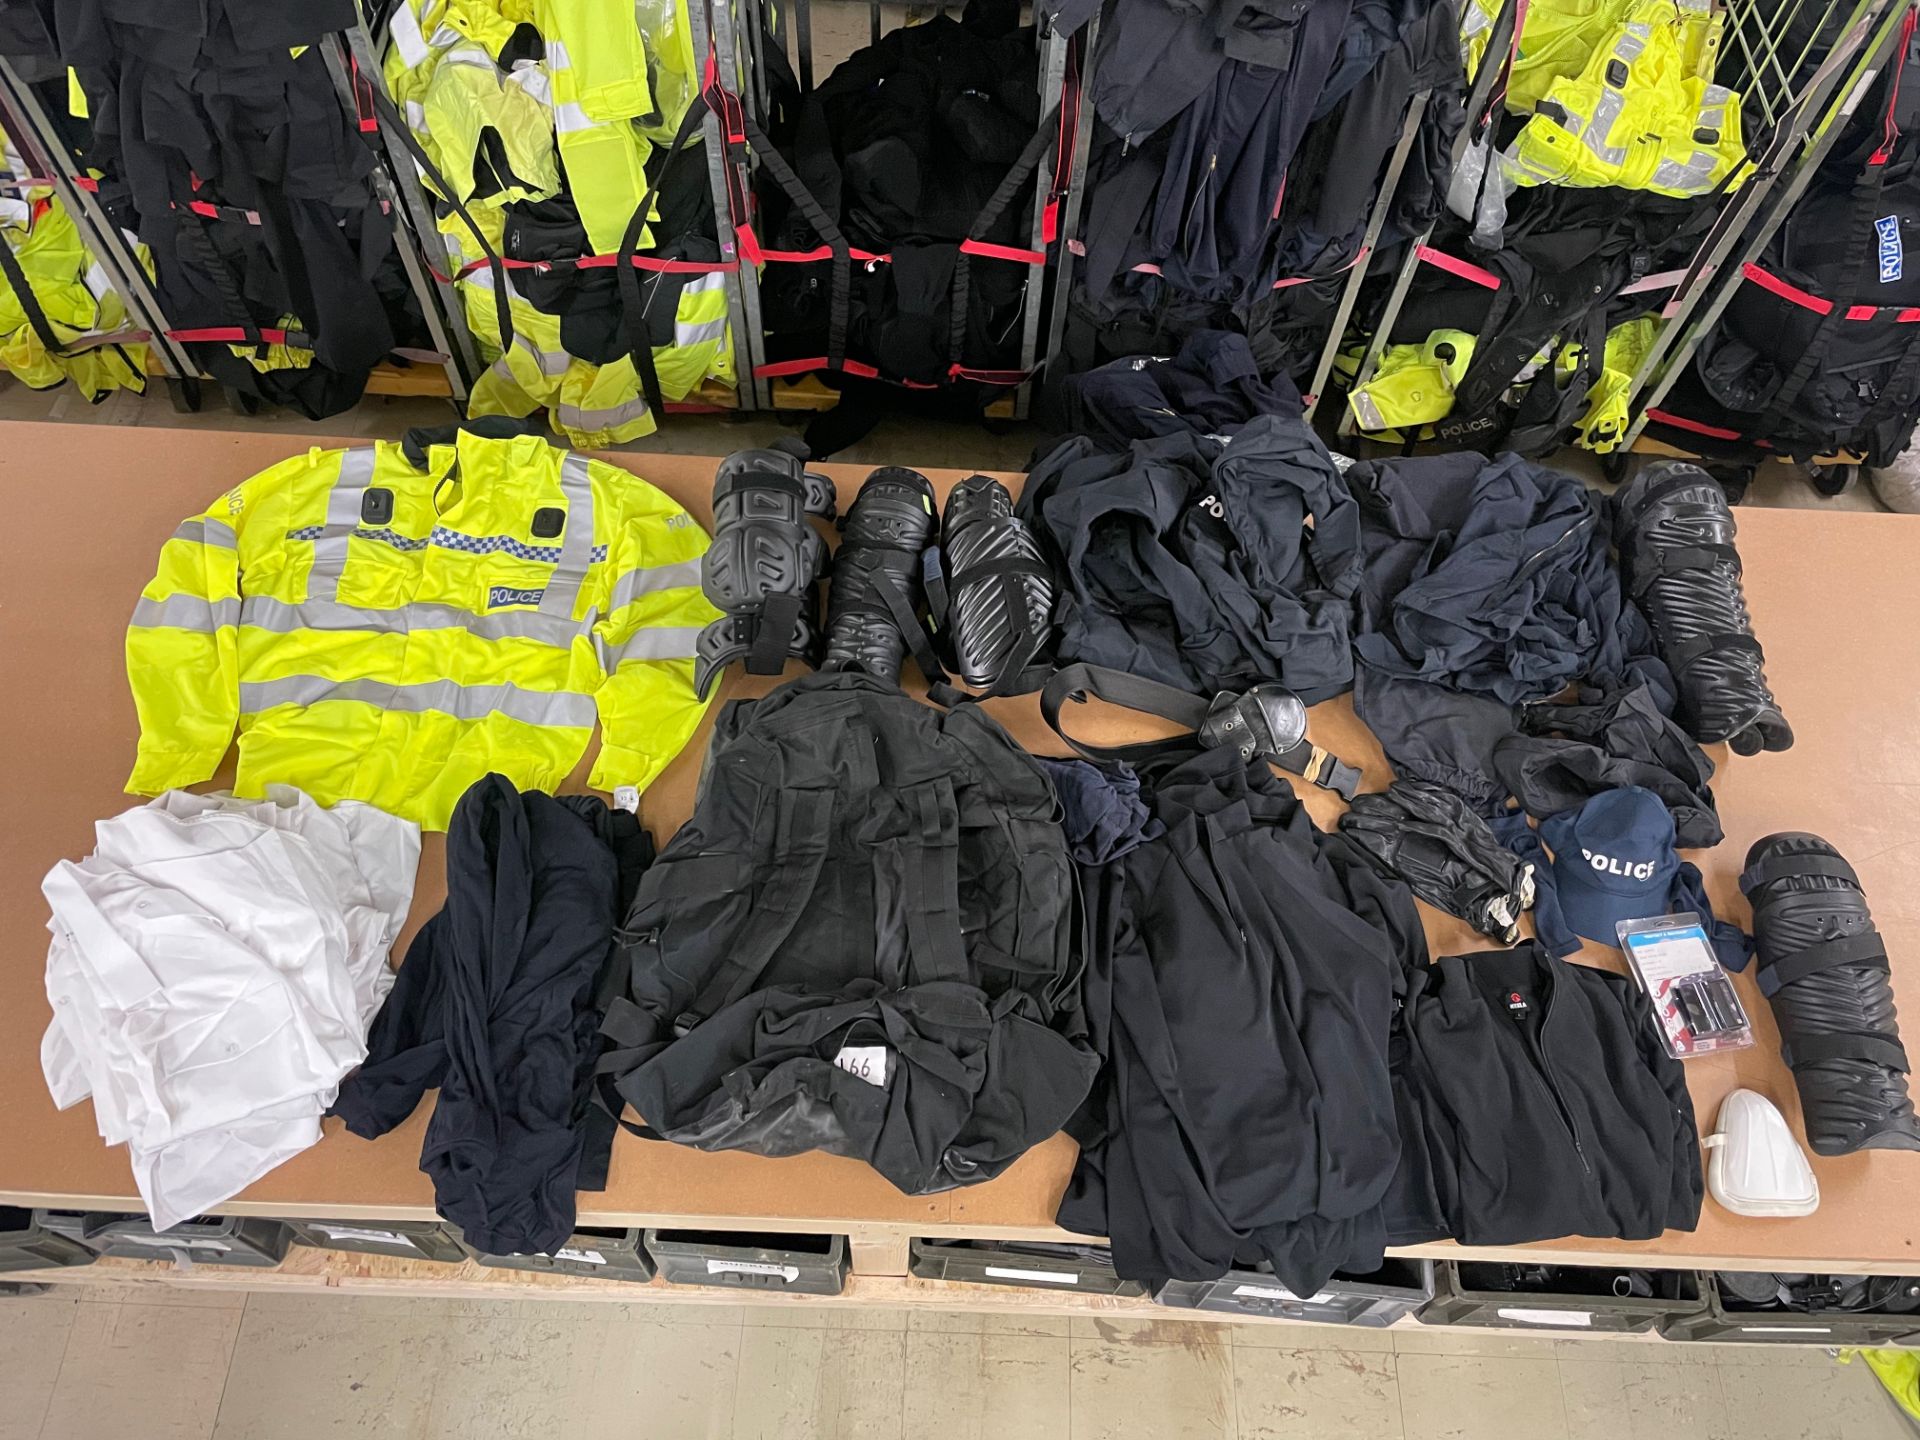 20 X BAGS EX POLICE CLOTHING & ACCESSORIES - RRP £5500.00 - Image 10 of 12